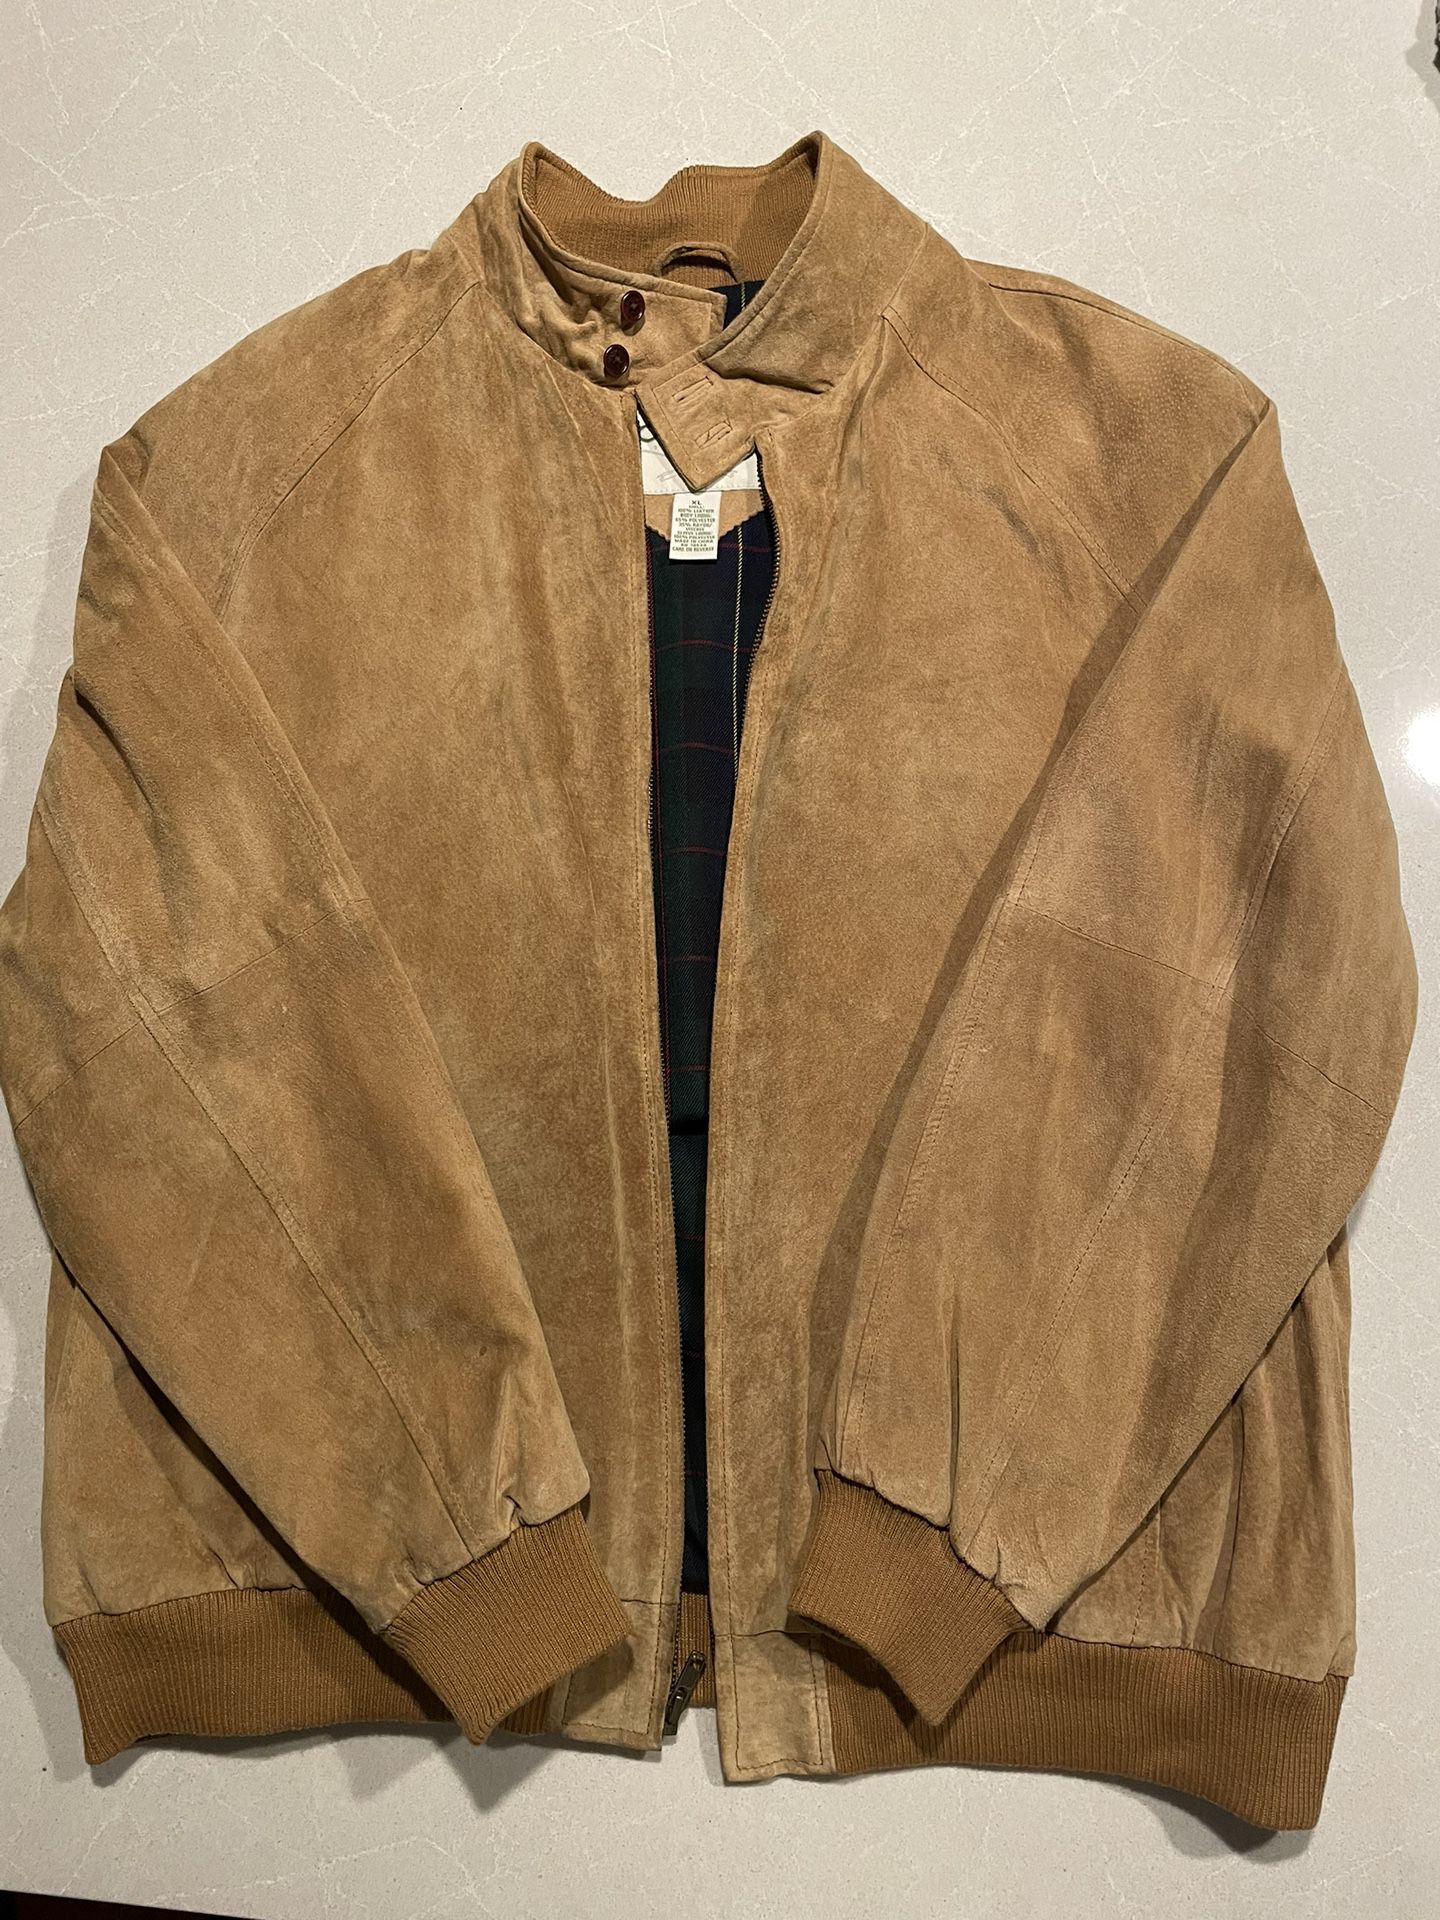 Orvis Tan Suede Leather Jacket Camel Bomber full zipper